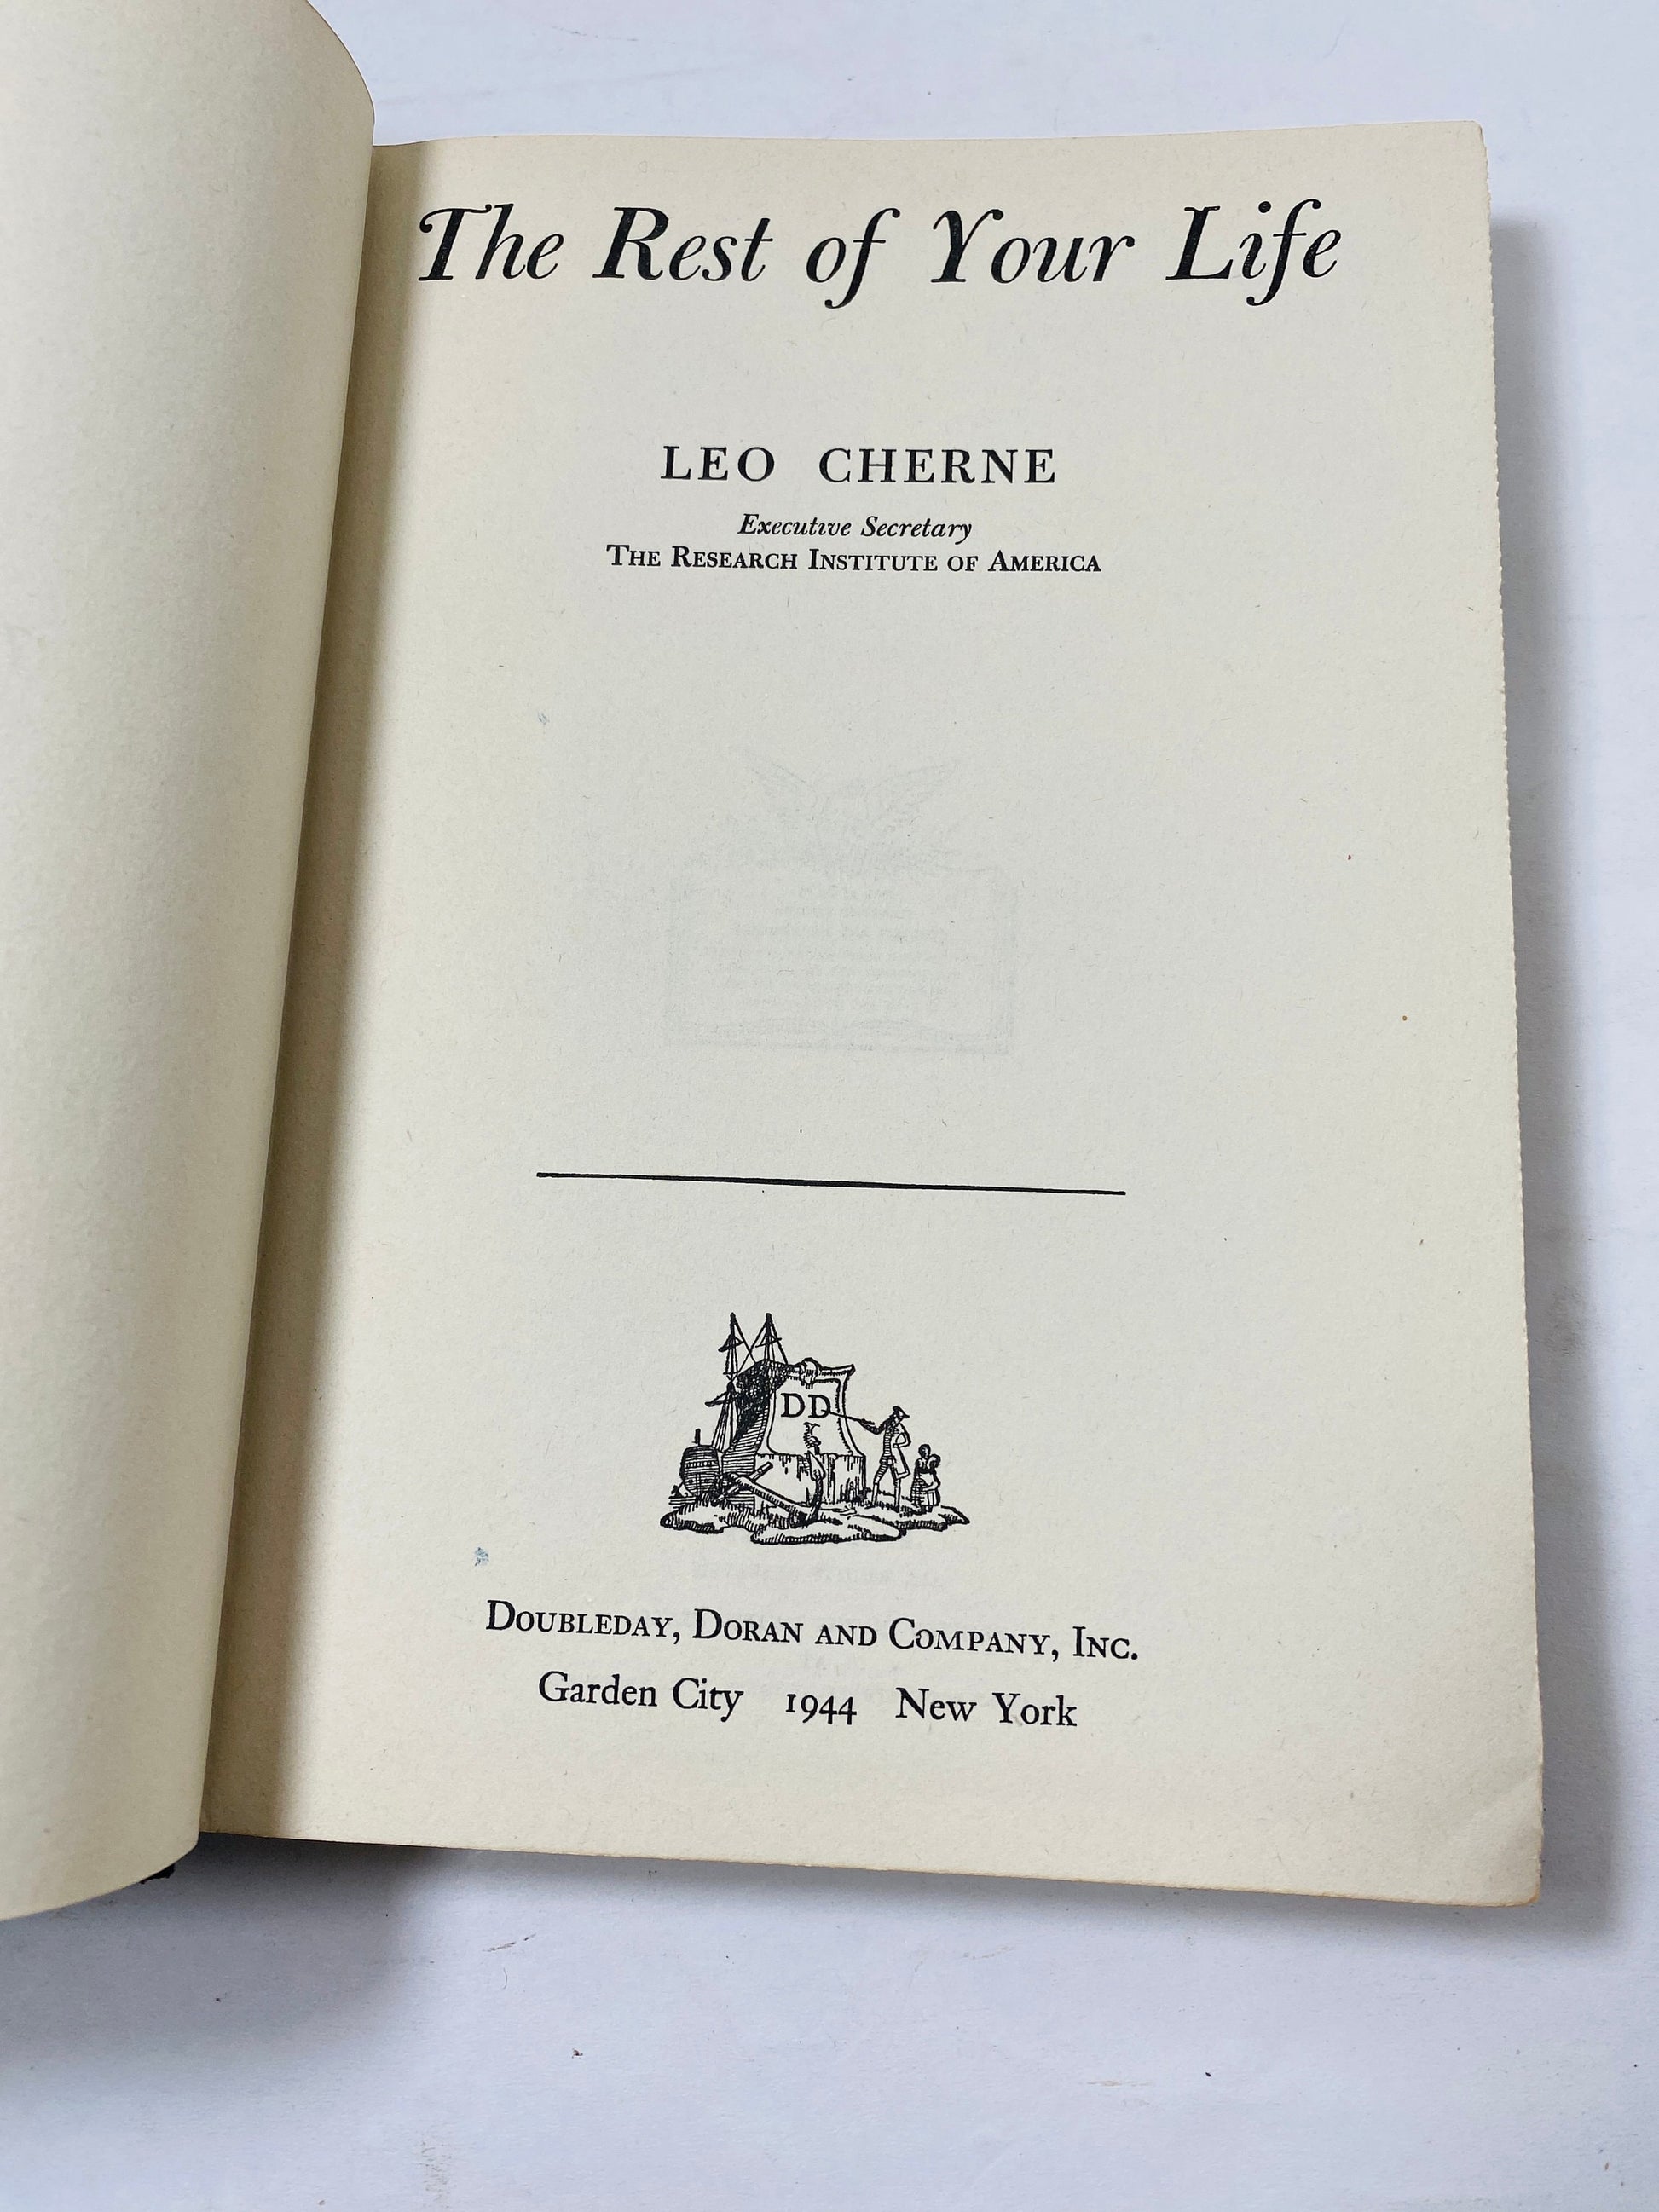 Rest of Your Life vintage book by Leo Cherne Communist Class Struggle economics and democracy.